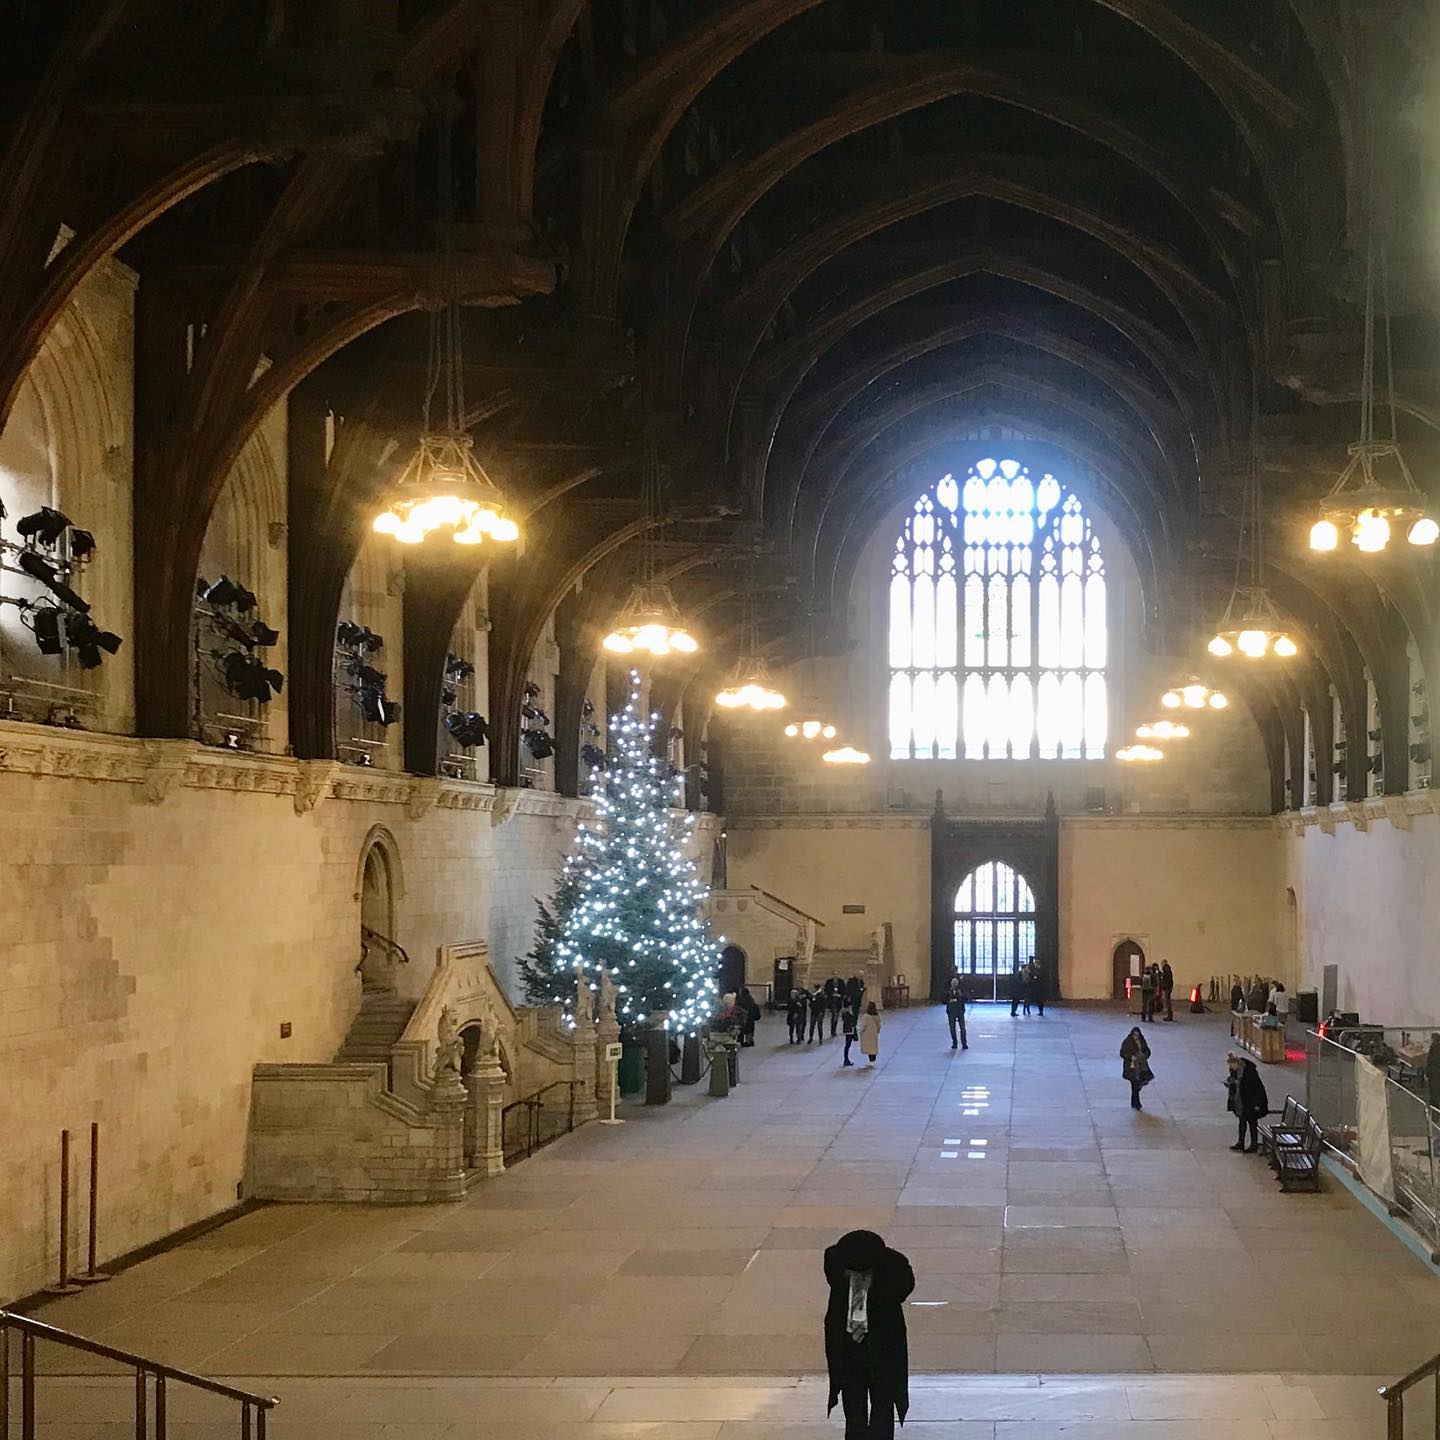 Westminster Hall today! A magnificent room loaded with history. #enturistilondon